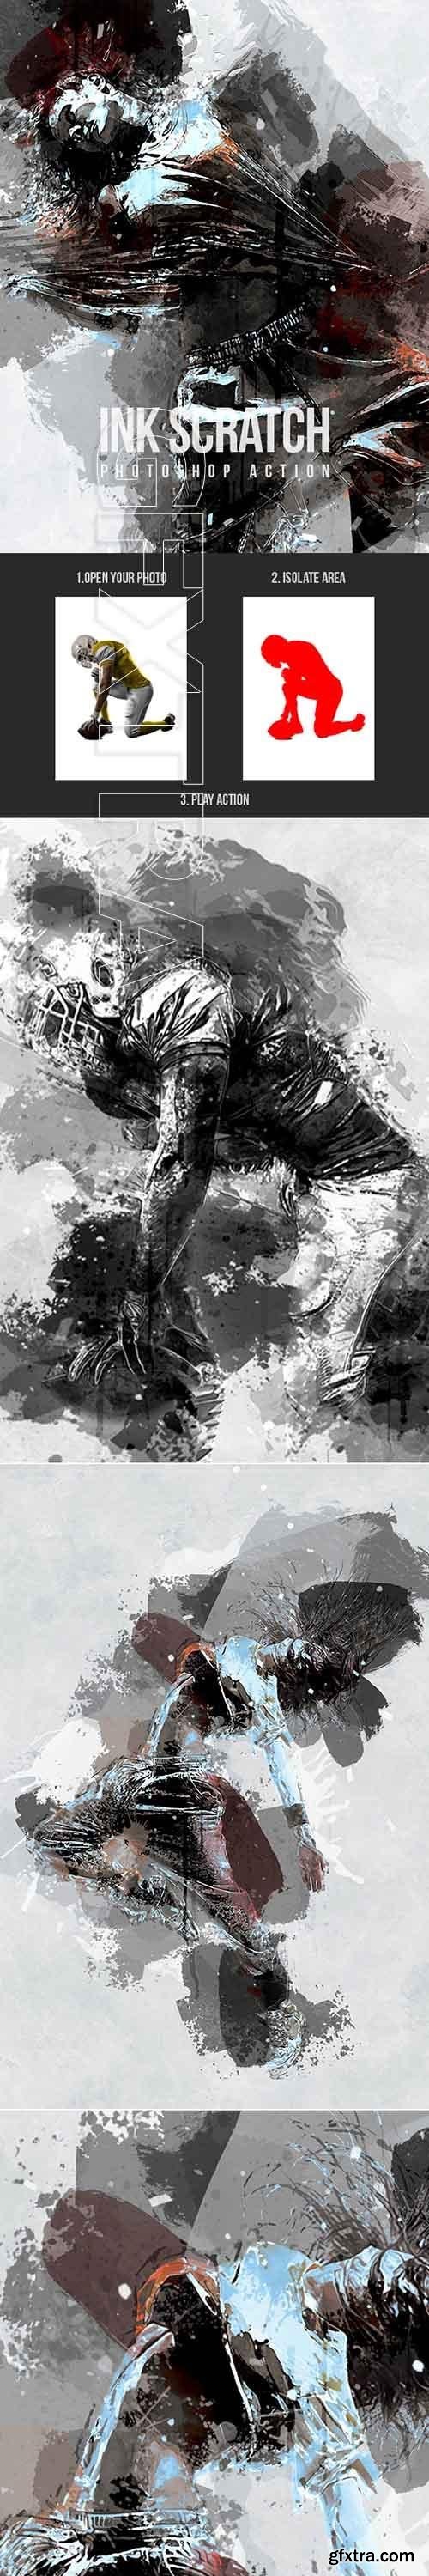 Graphicriver - Ink Scratch - Photoshop Action 21318489